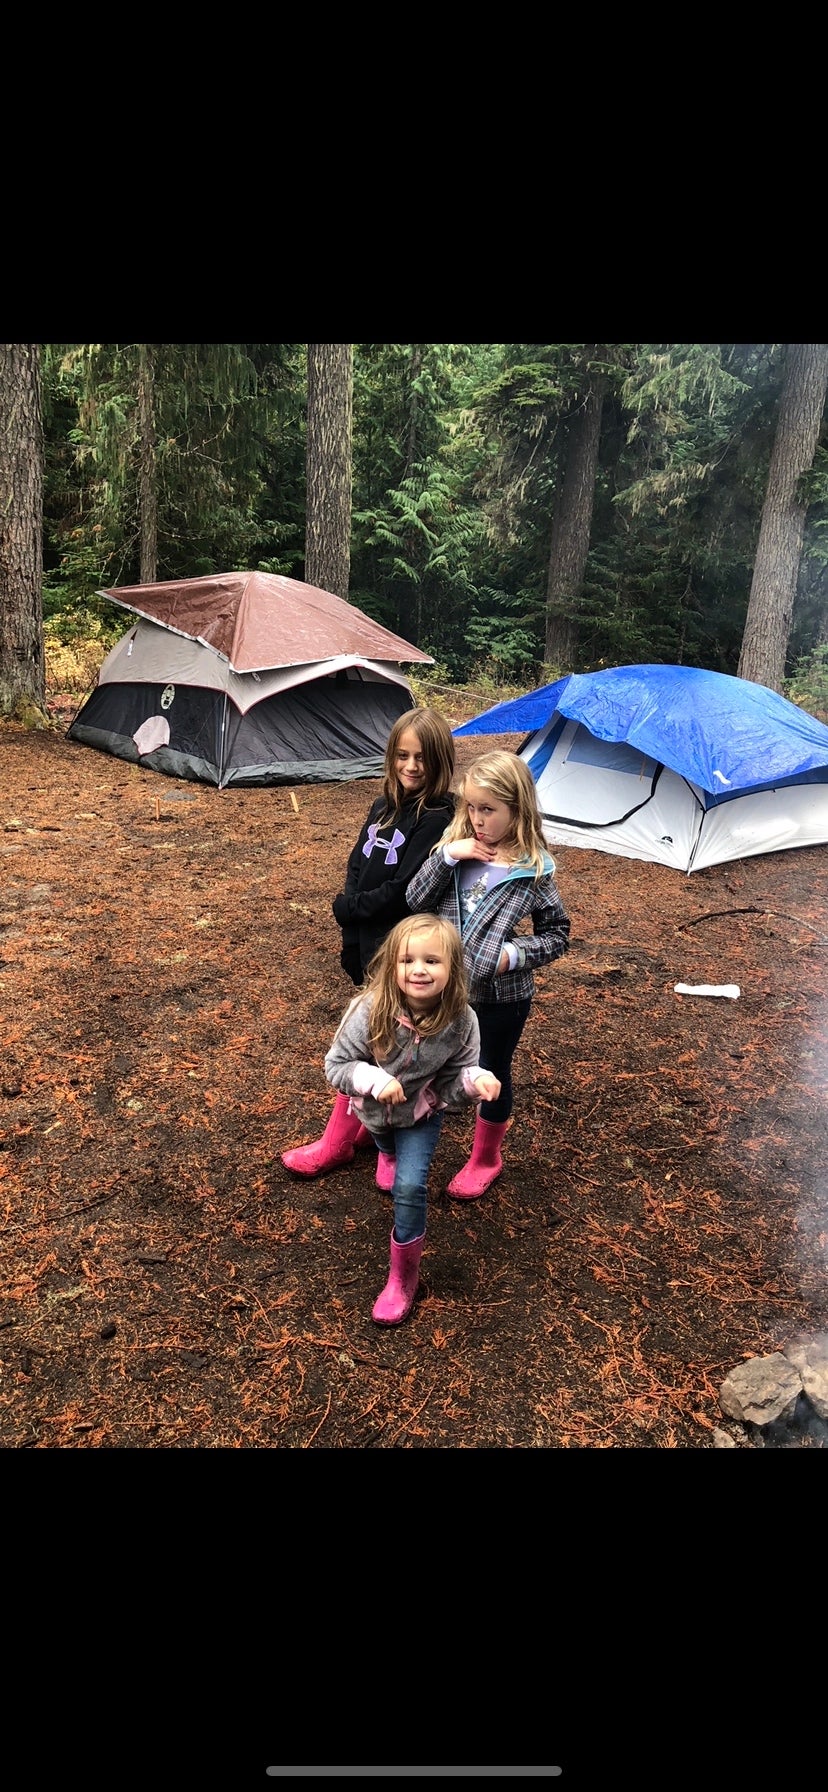 Camper submitted image from Gifford Pinchot National Forest Dispersed Site - 5